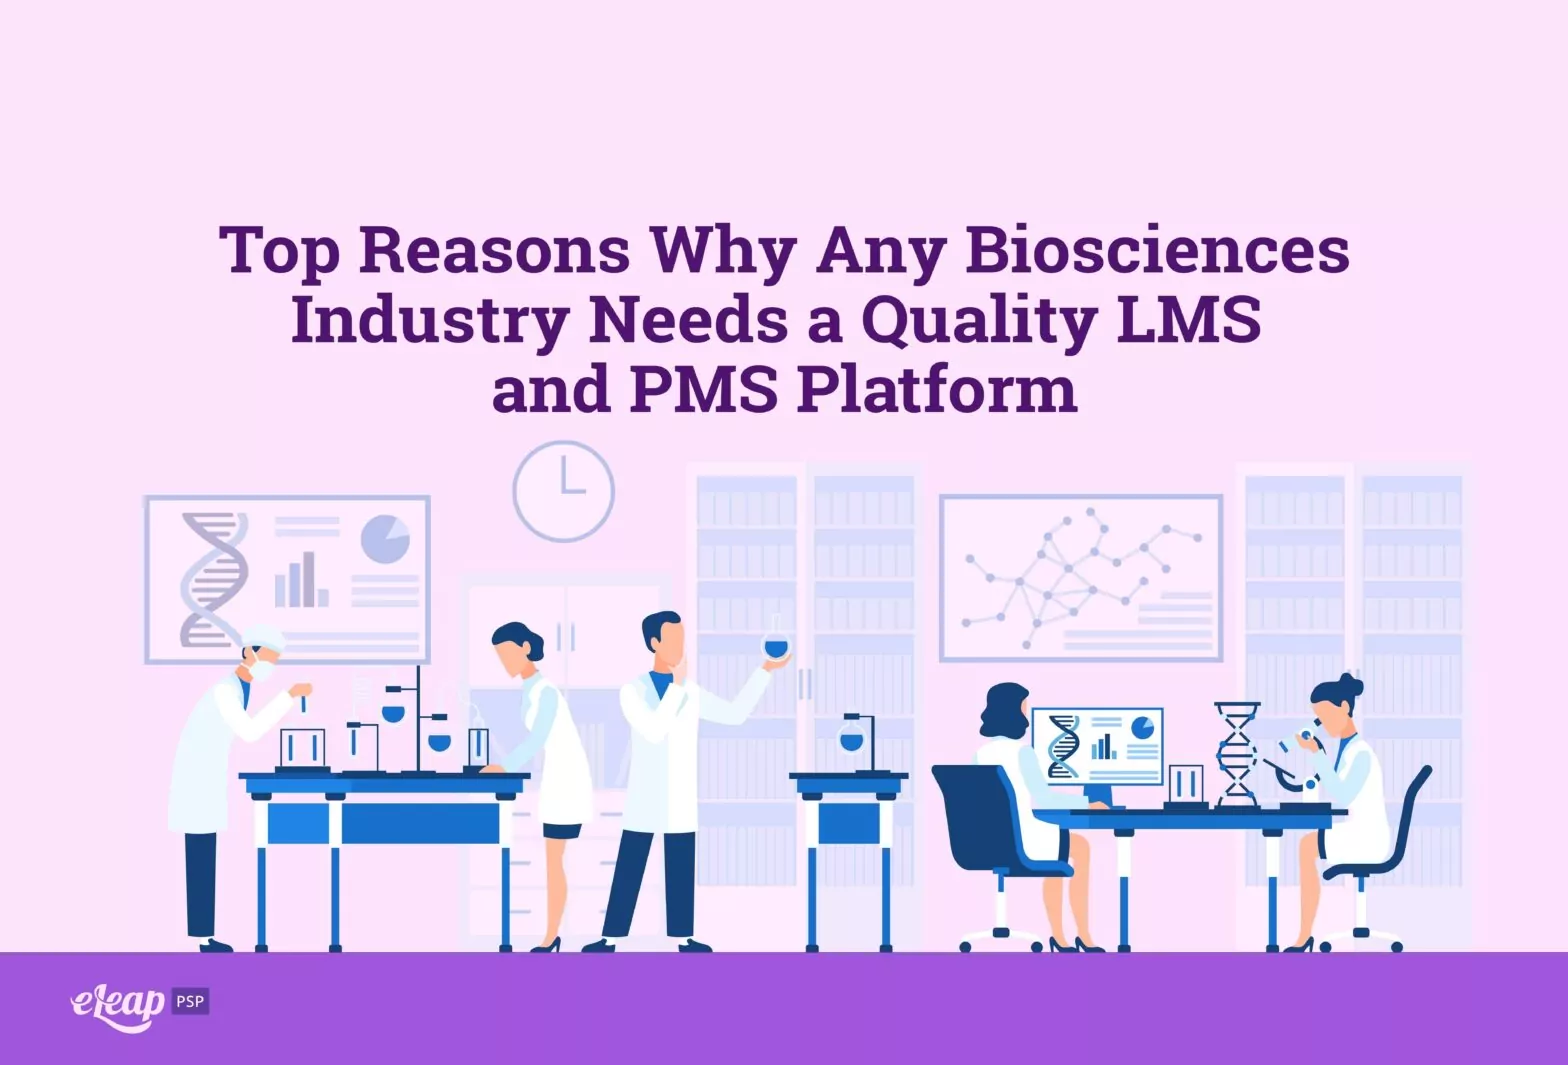 Top Reasons Why Any Biosciences Industry Needs a Quality LMS and PMS Platform